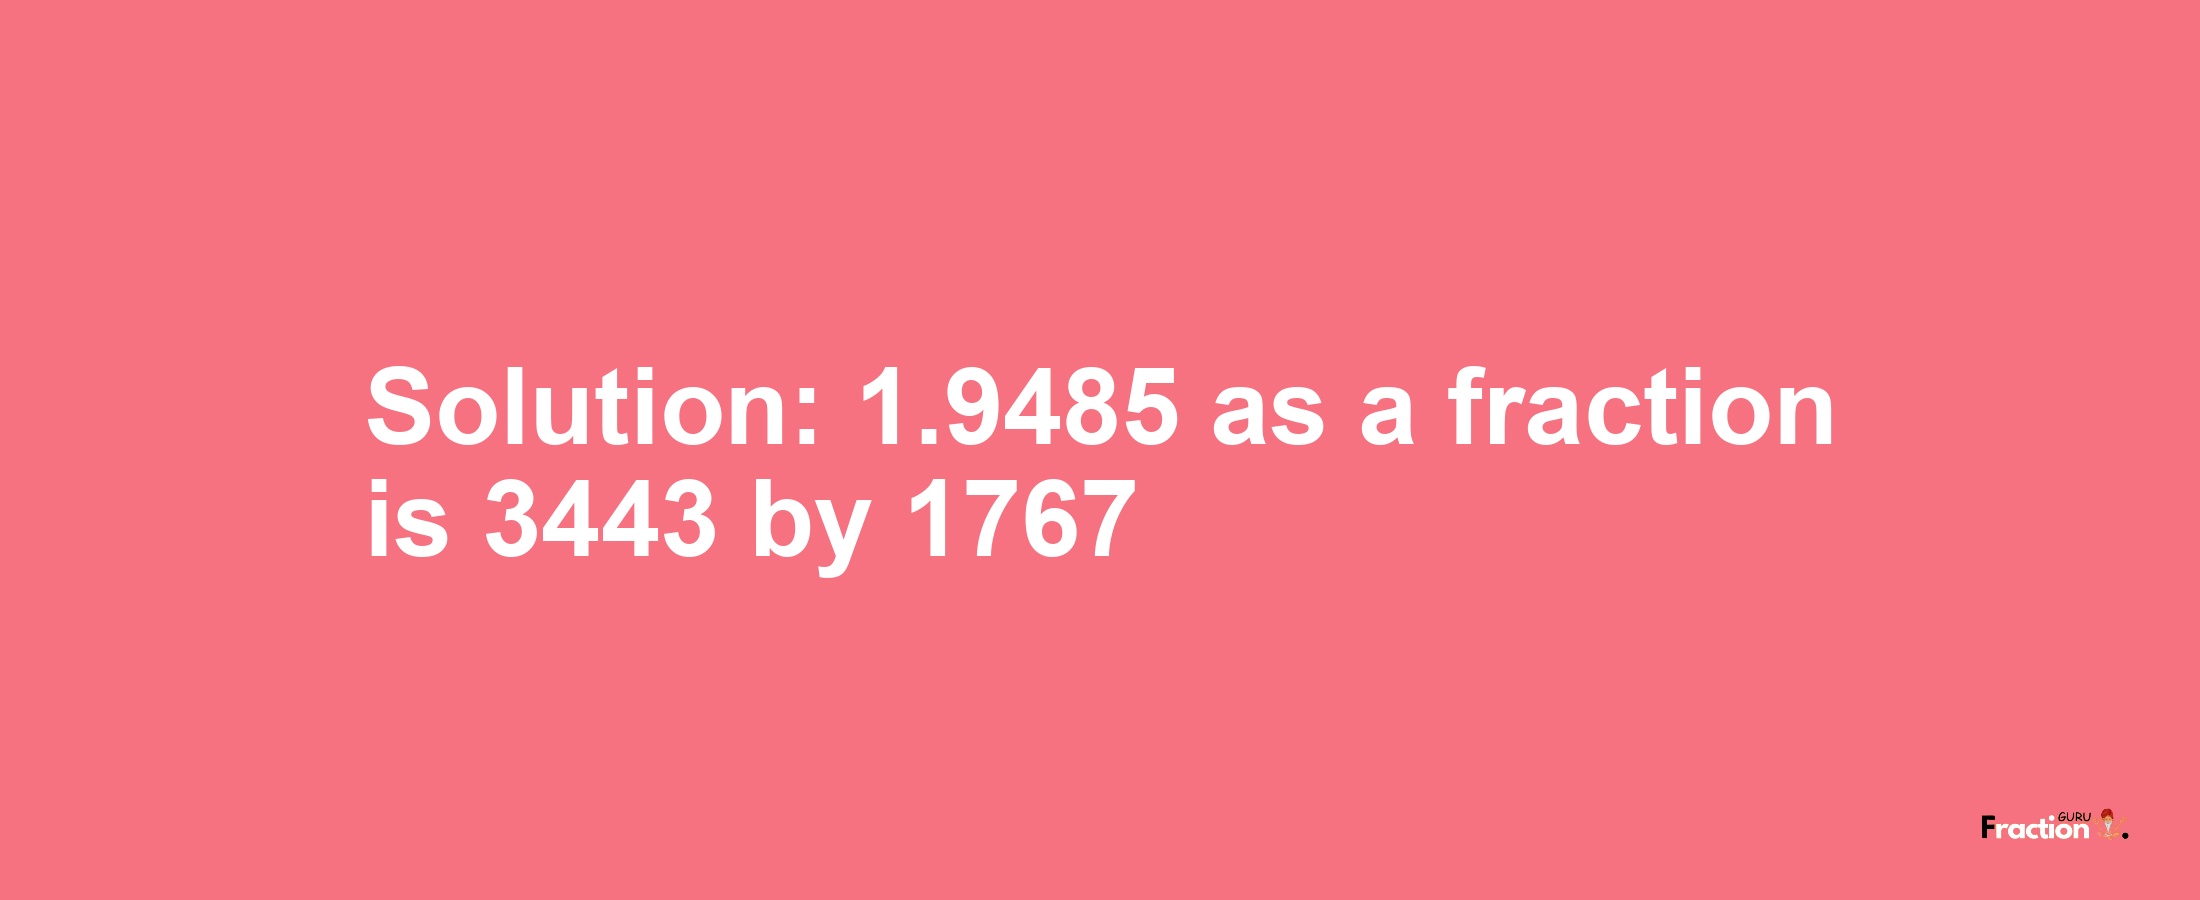 Solution:1.9485 as a fraction is 3443/1767